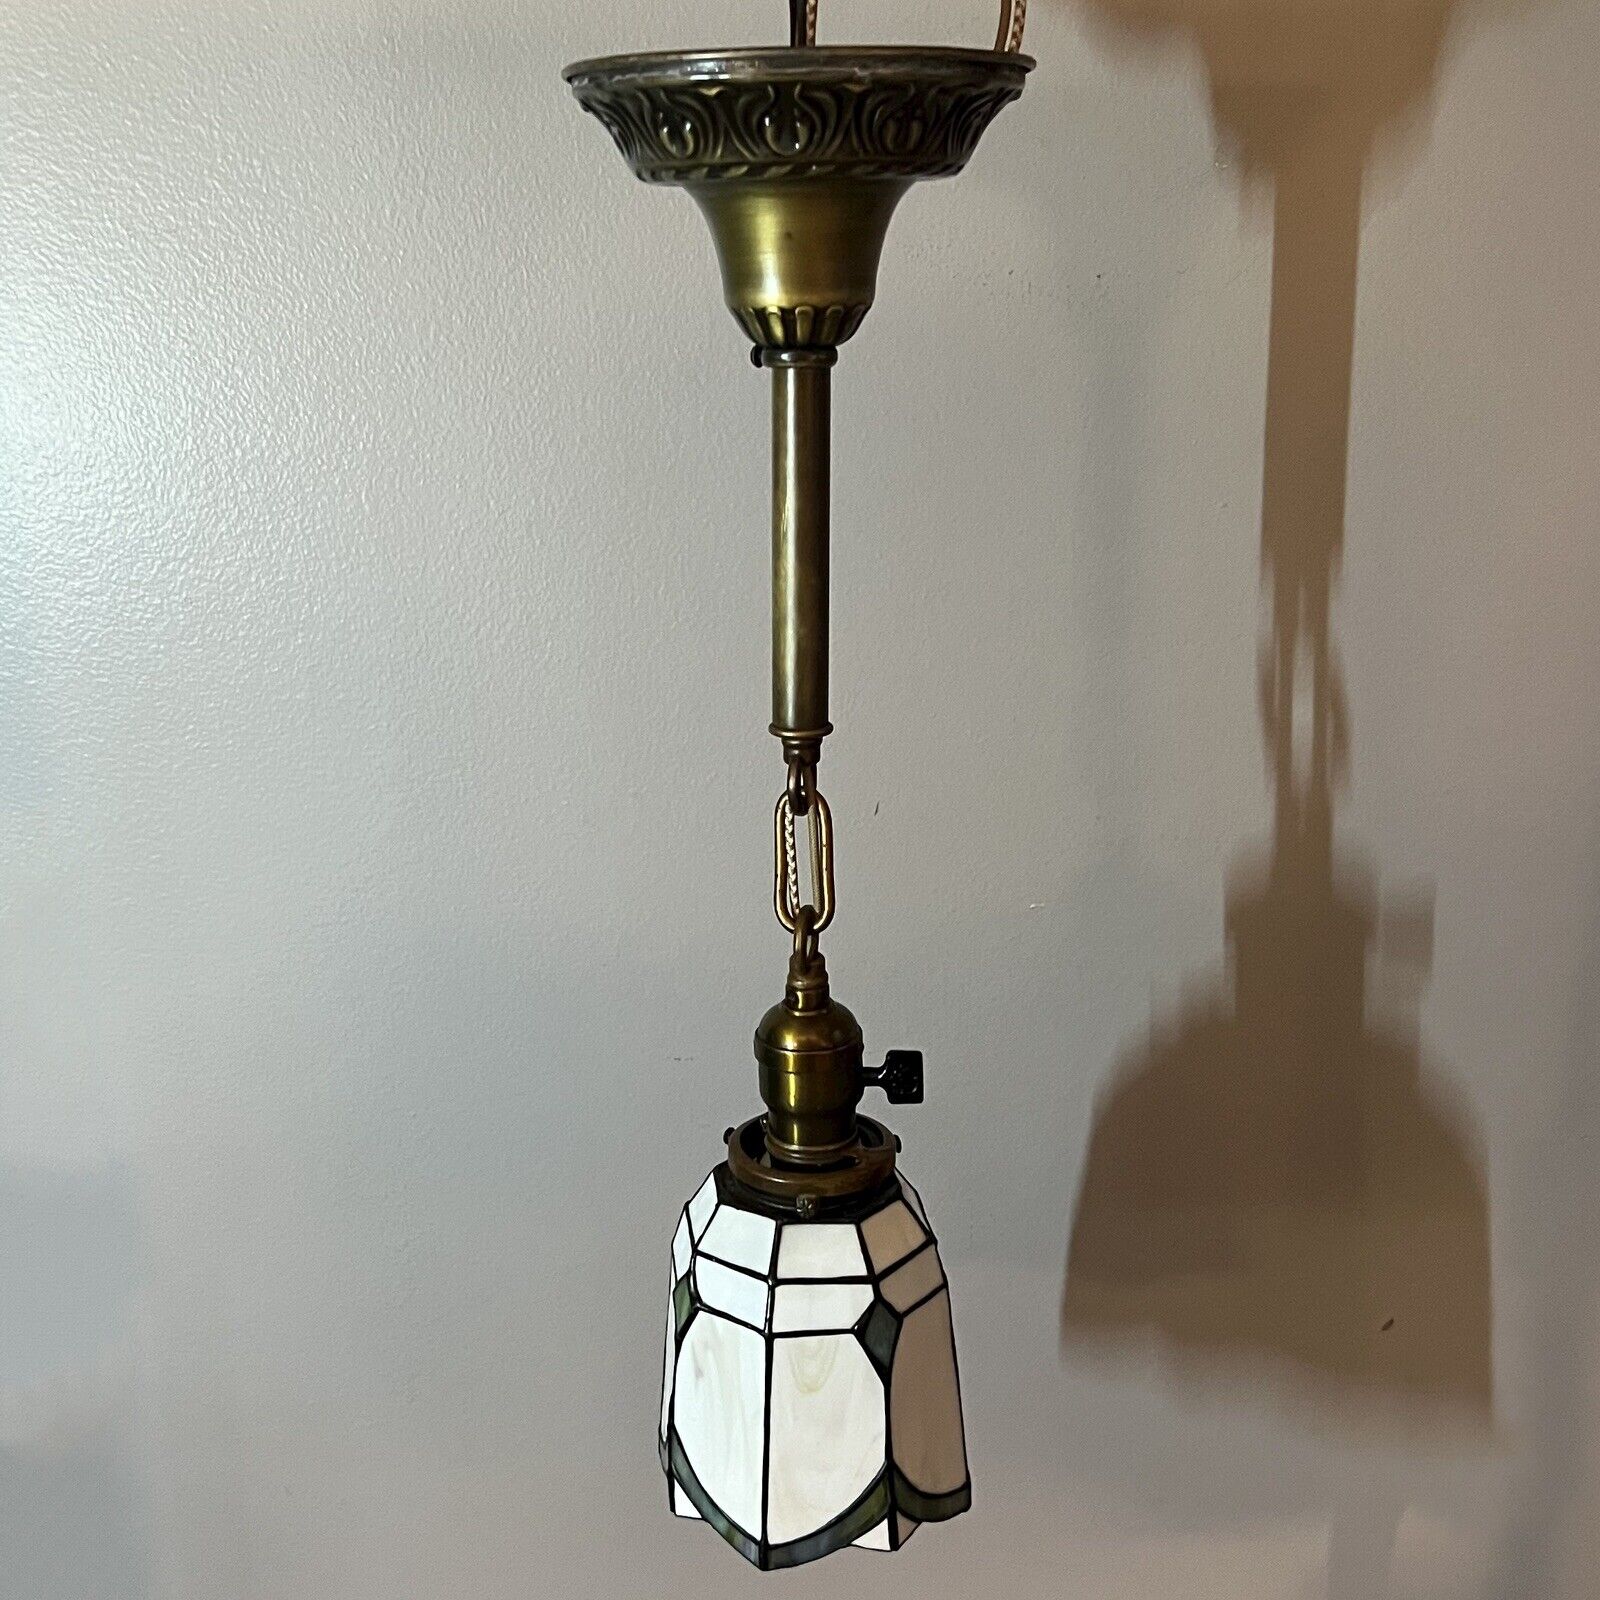 Single Antique Brass Pendant Light Nice Stained Glass Shade 37B